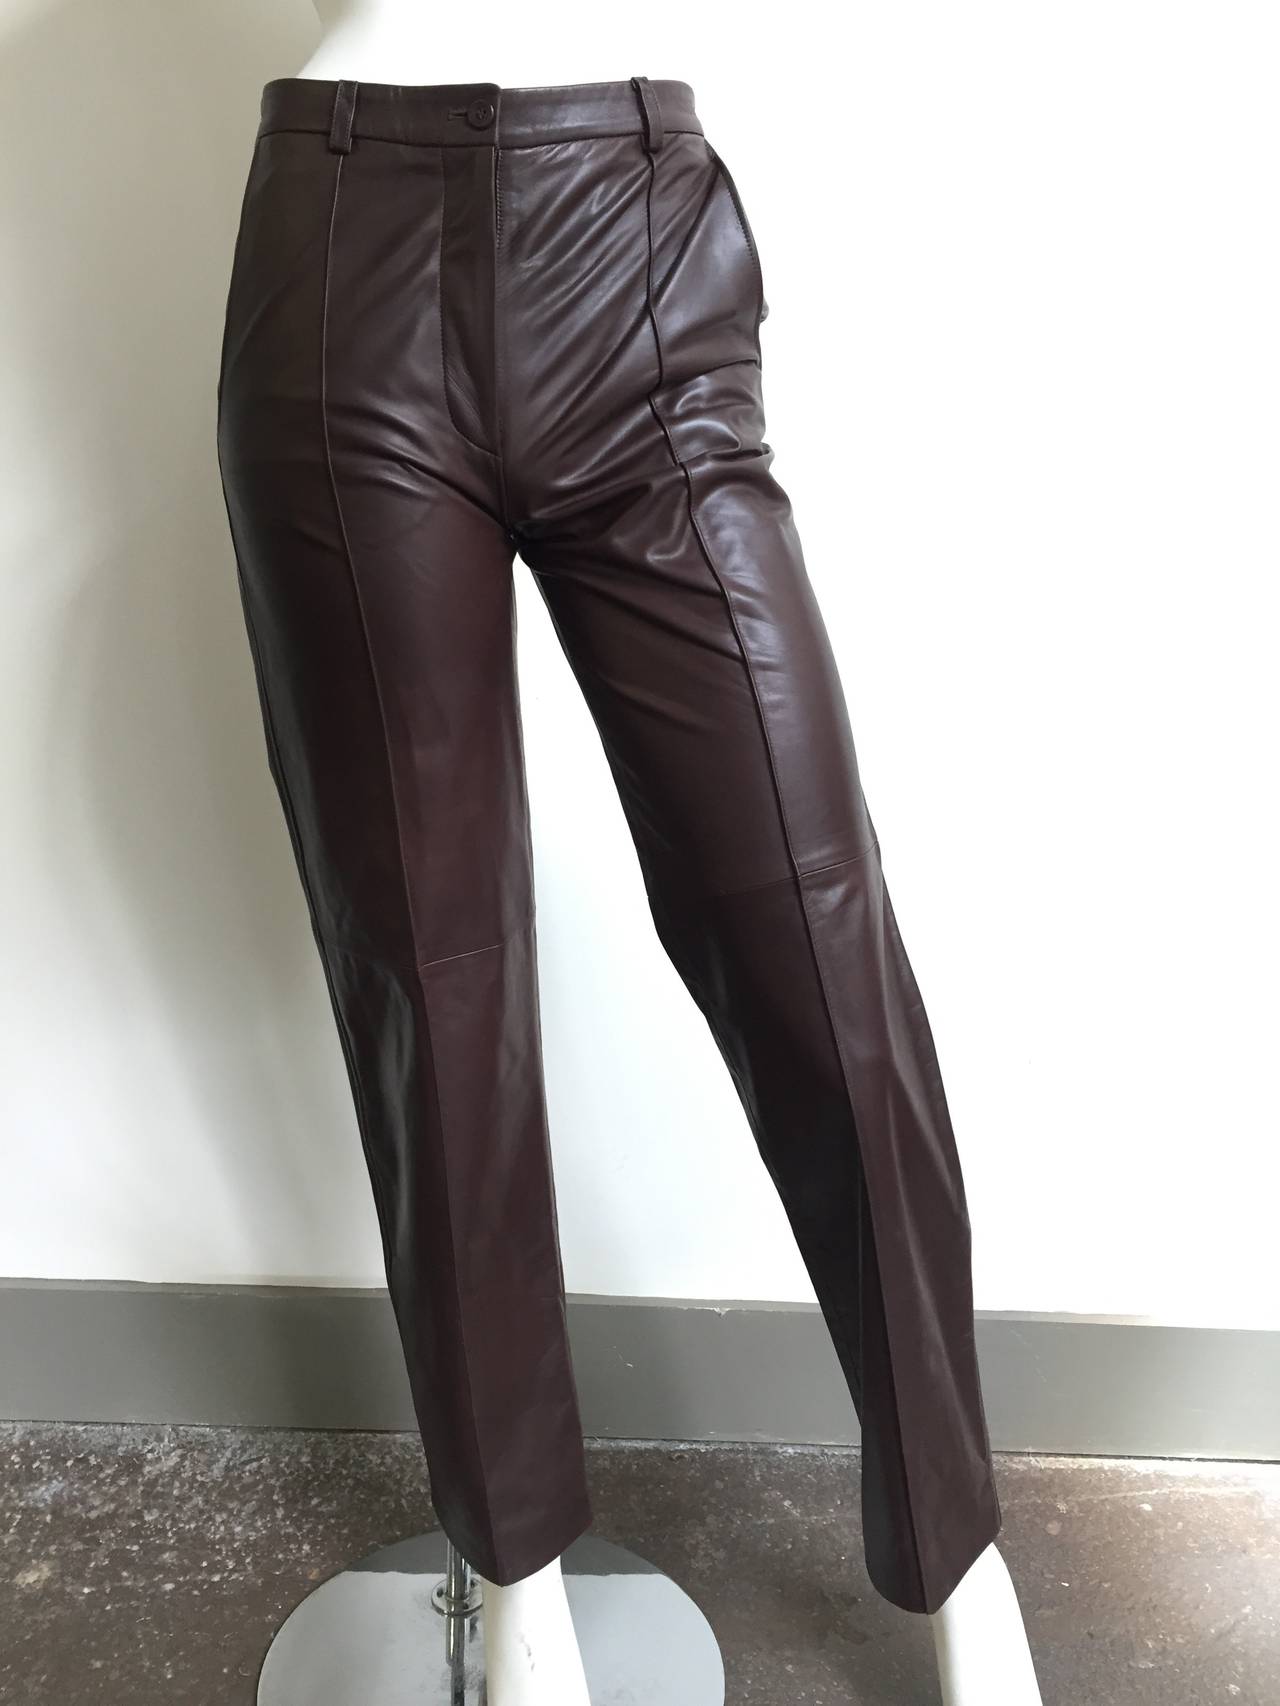 Bottega Veneta brown leather pants with pockets Italian size 40 but fits USA size 4.
Measurements are: 
29.1/2